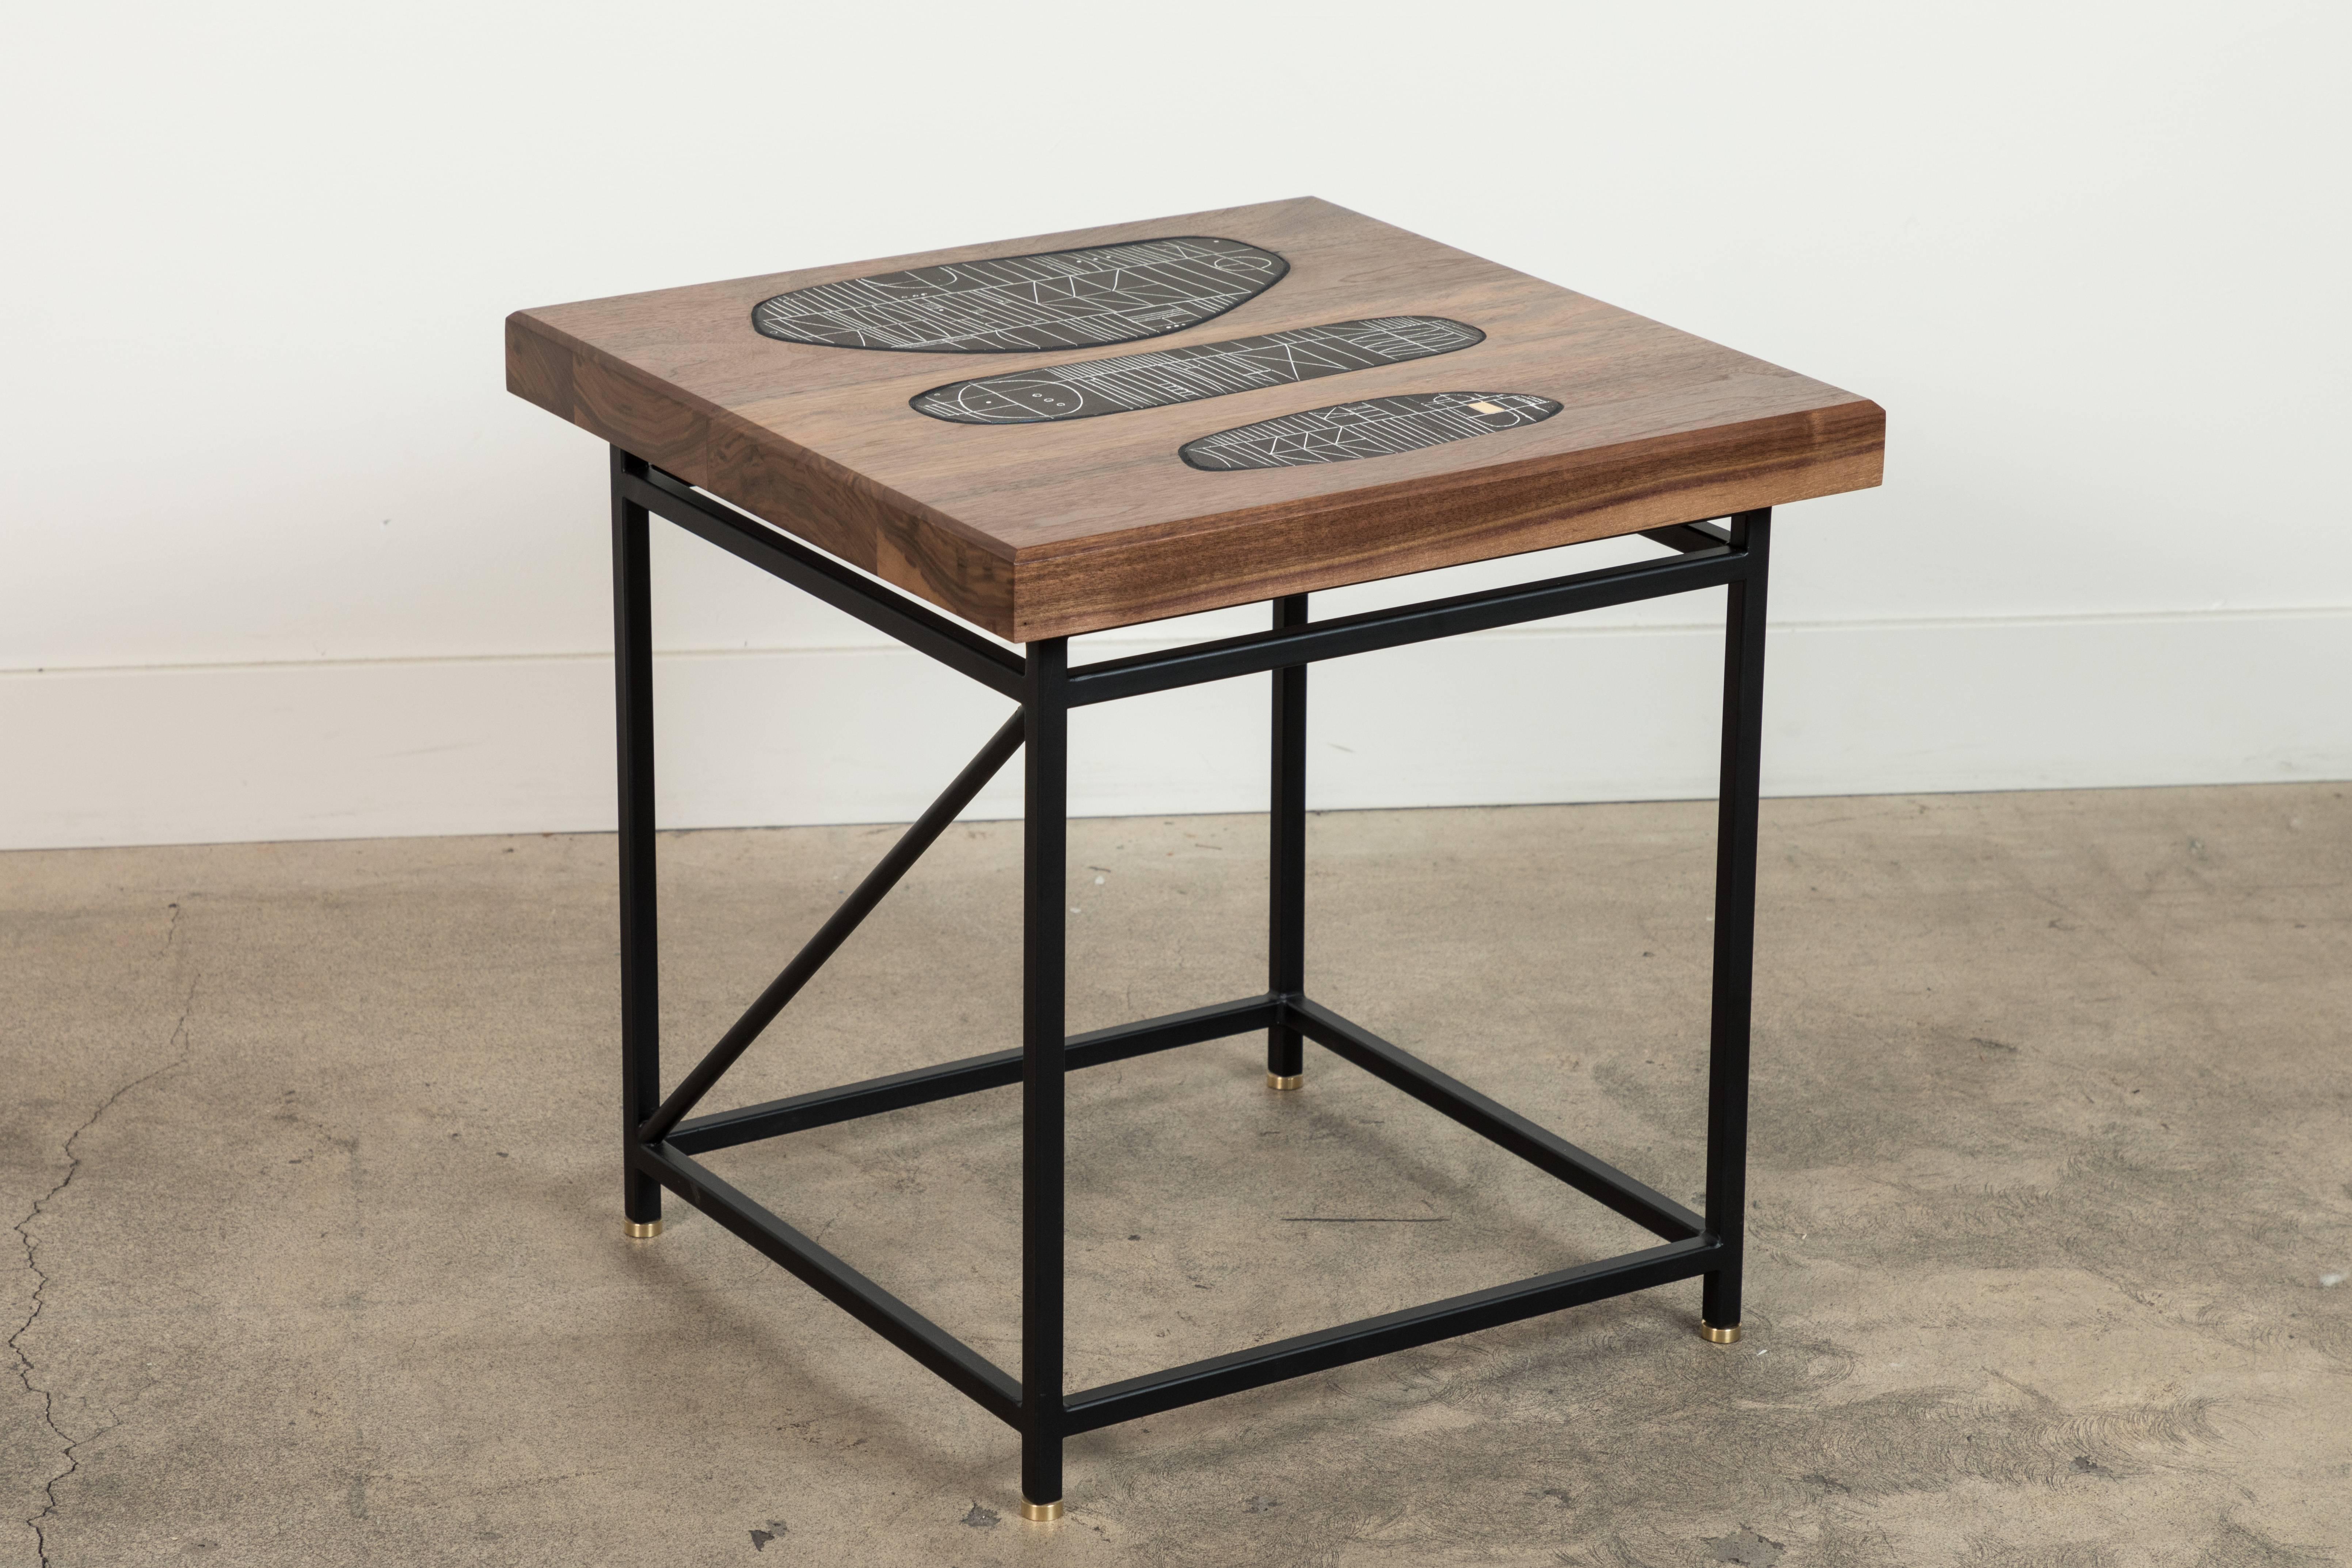 Solid walnut and ceramic side table by Heather Rosenman for Collabs in clay.